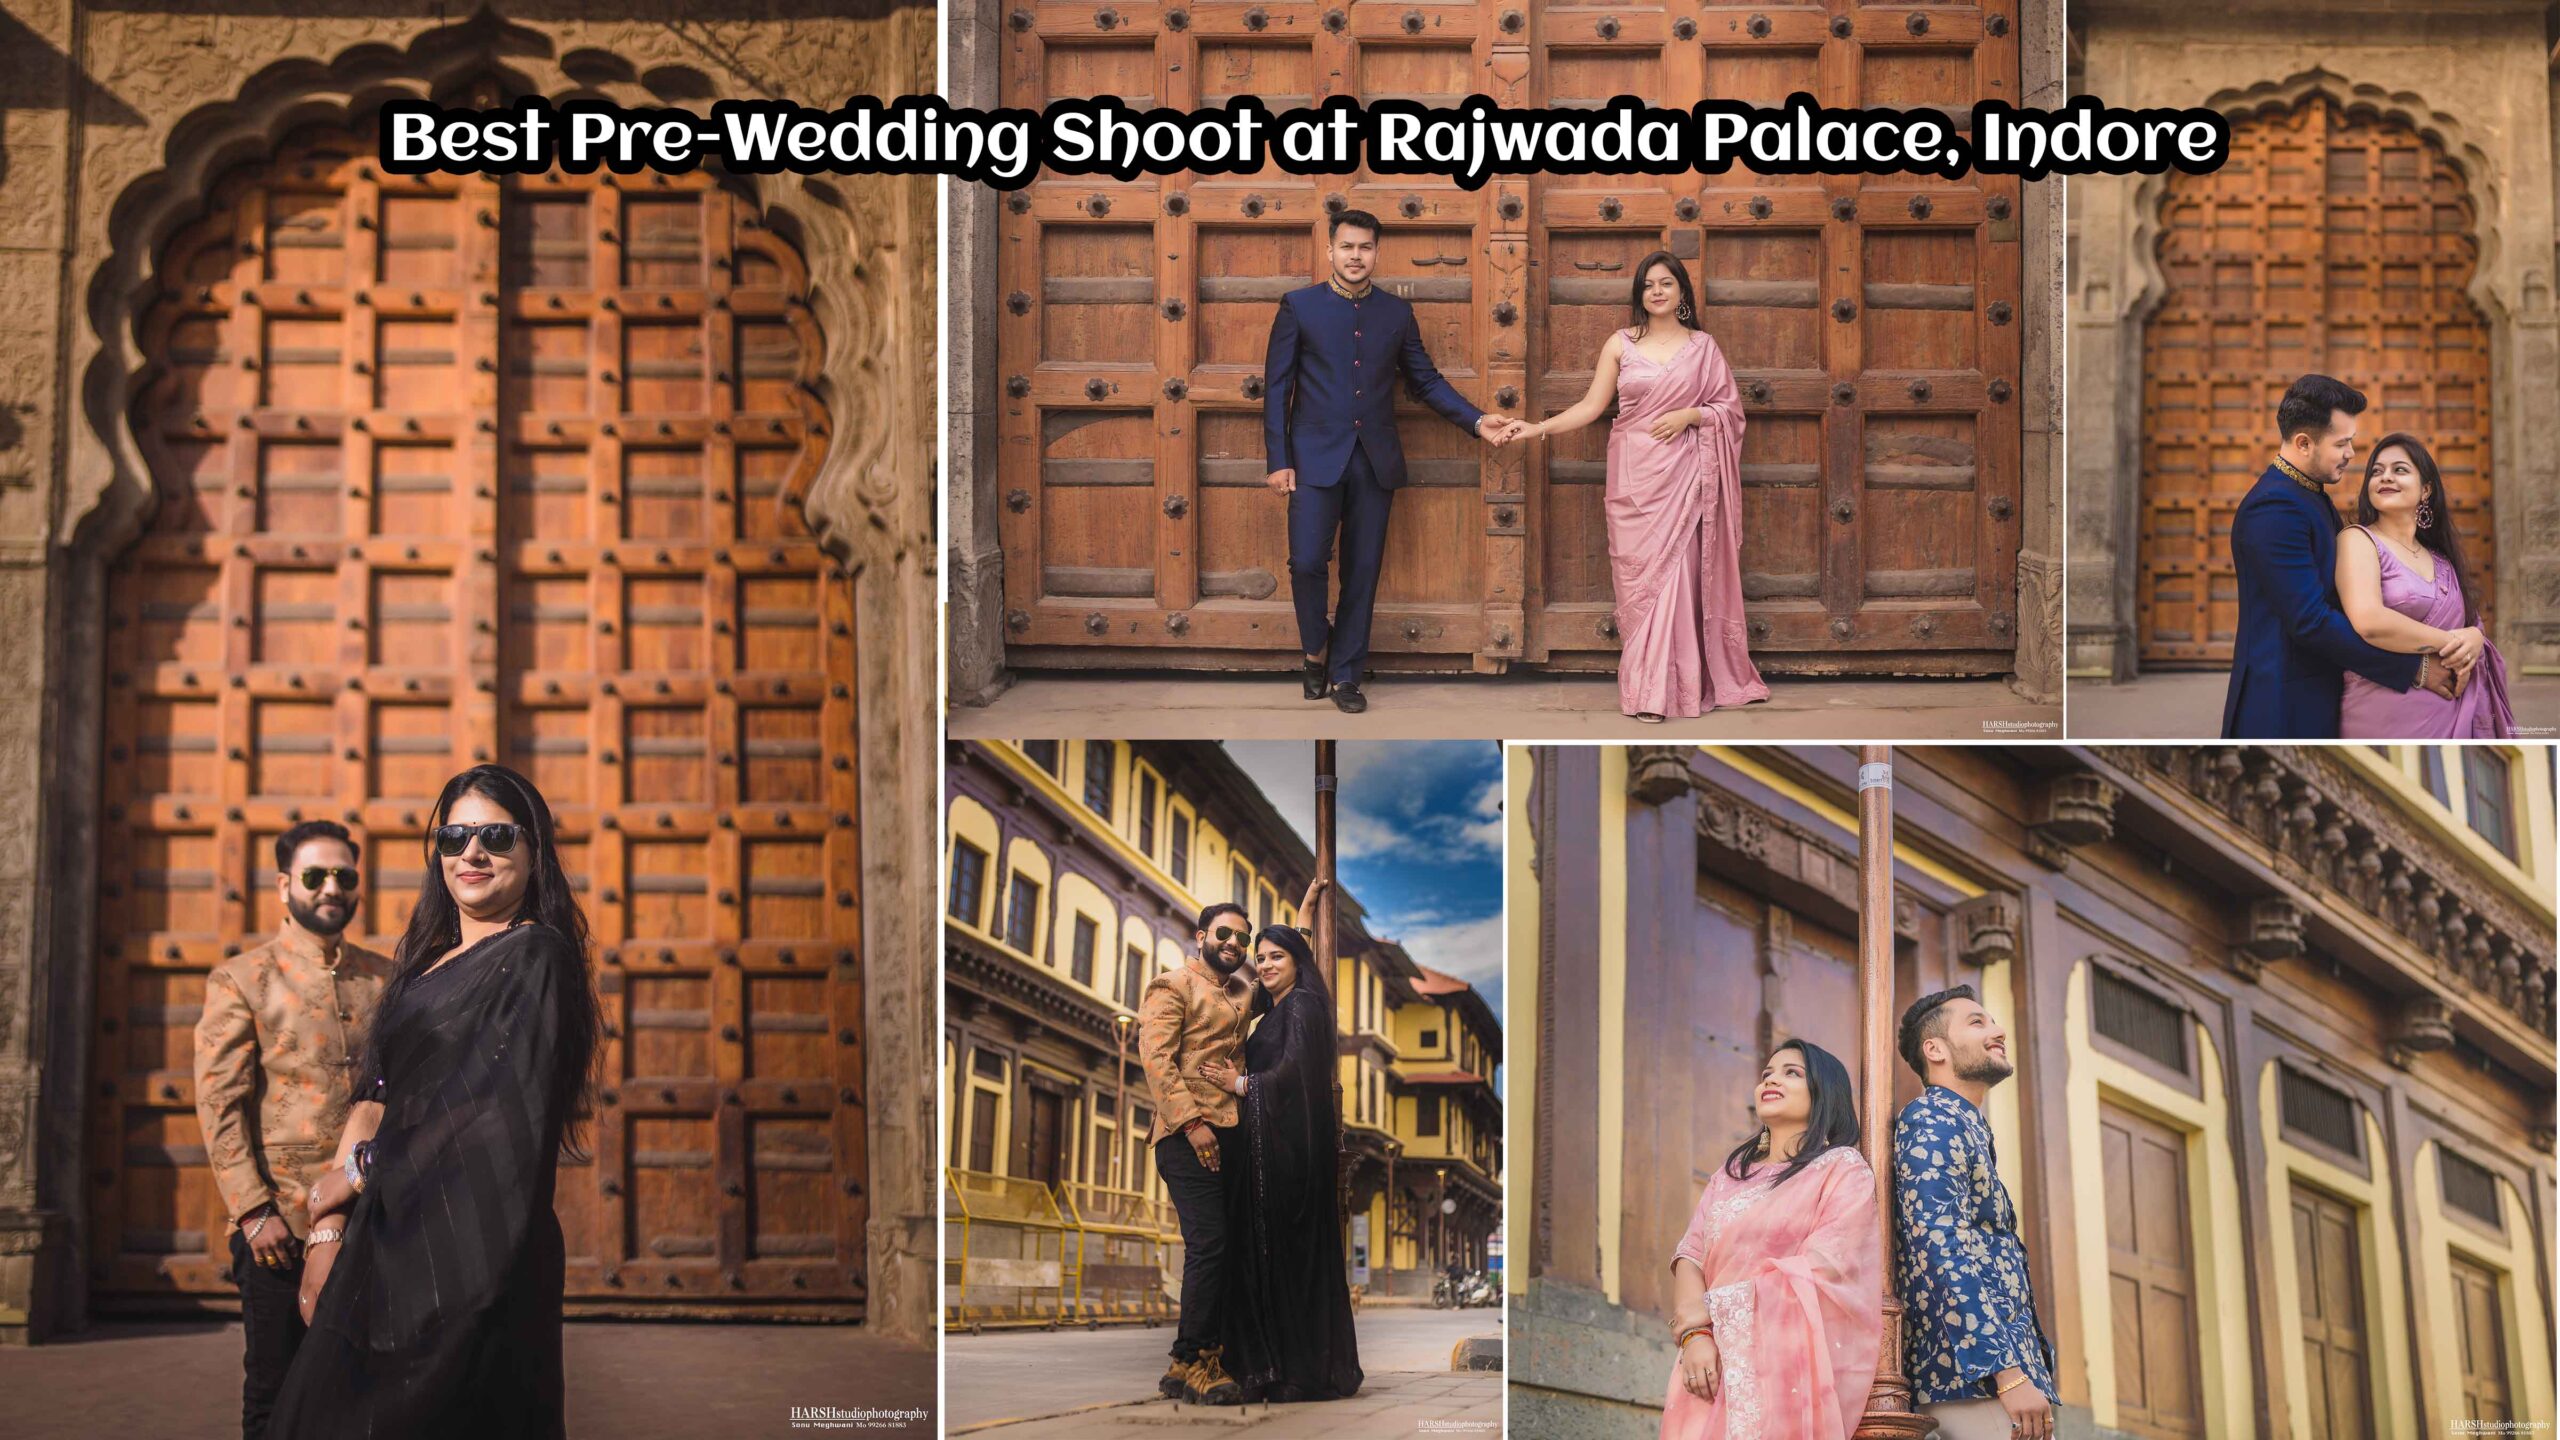 Best Pre-Wedding Shoot at Rajwada Palace, Indore : Looking for the best pre-wedding shoot locations in Indore? Rajwada Palace is a top choice for couples who want a blend of historical grandeur and romantic ambiance for their pre-wedding photos. Rajwada Palace, with its majestic architecture and rich history, provides a stunning backdrop for your pre-wedding shoot. The palace's intricate carvings, grand courtyards, and regal atmosphere will add a touch of royalty to your photos.